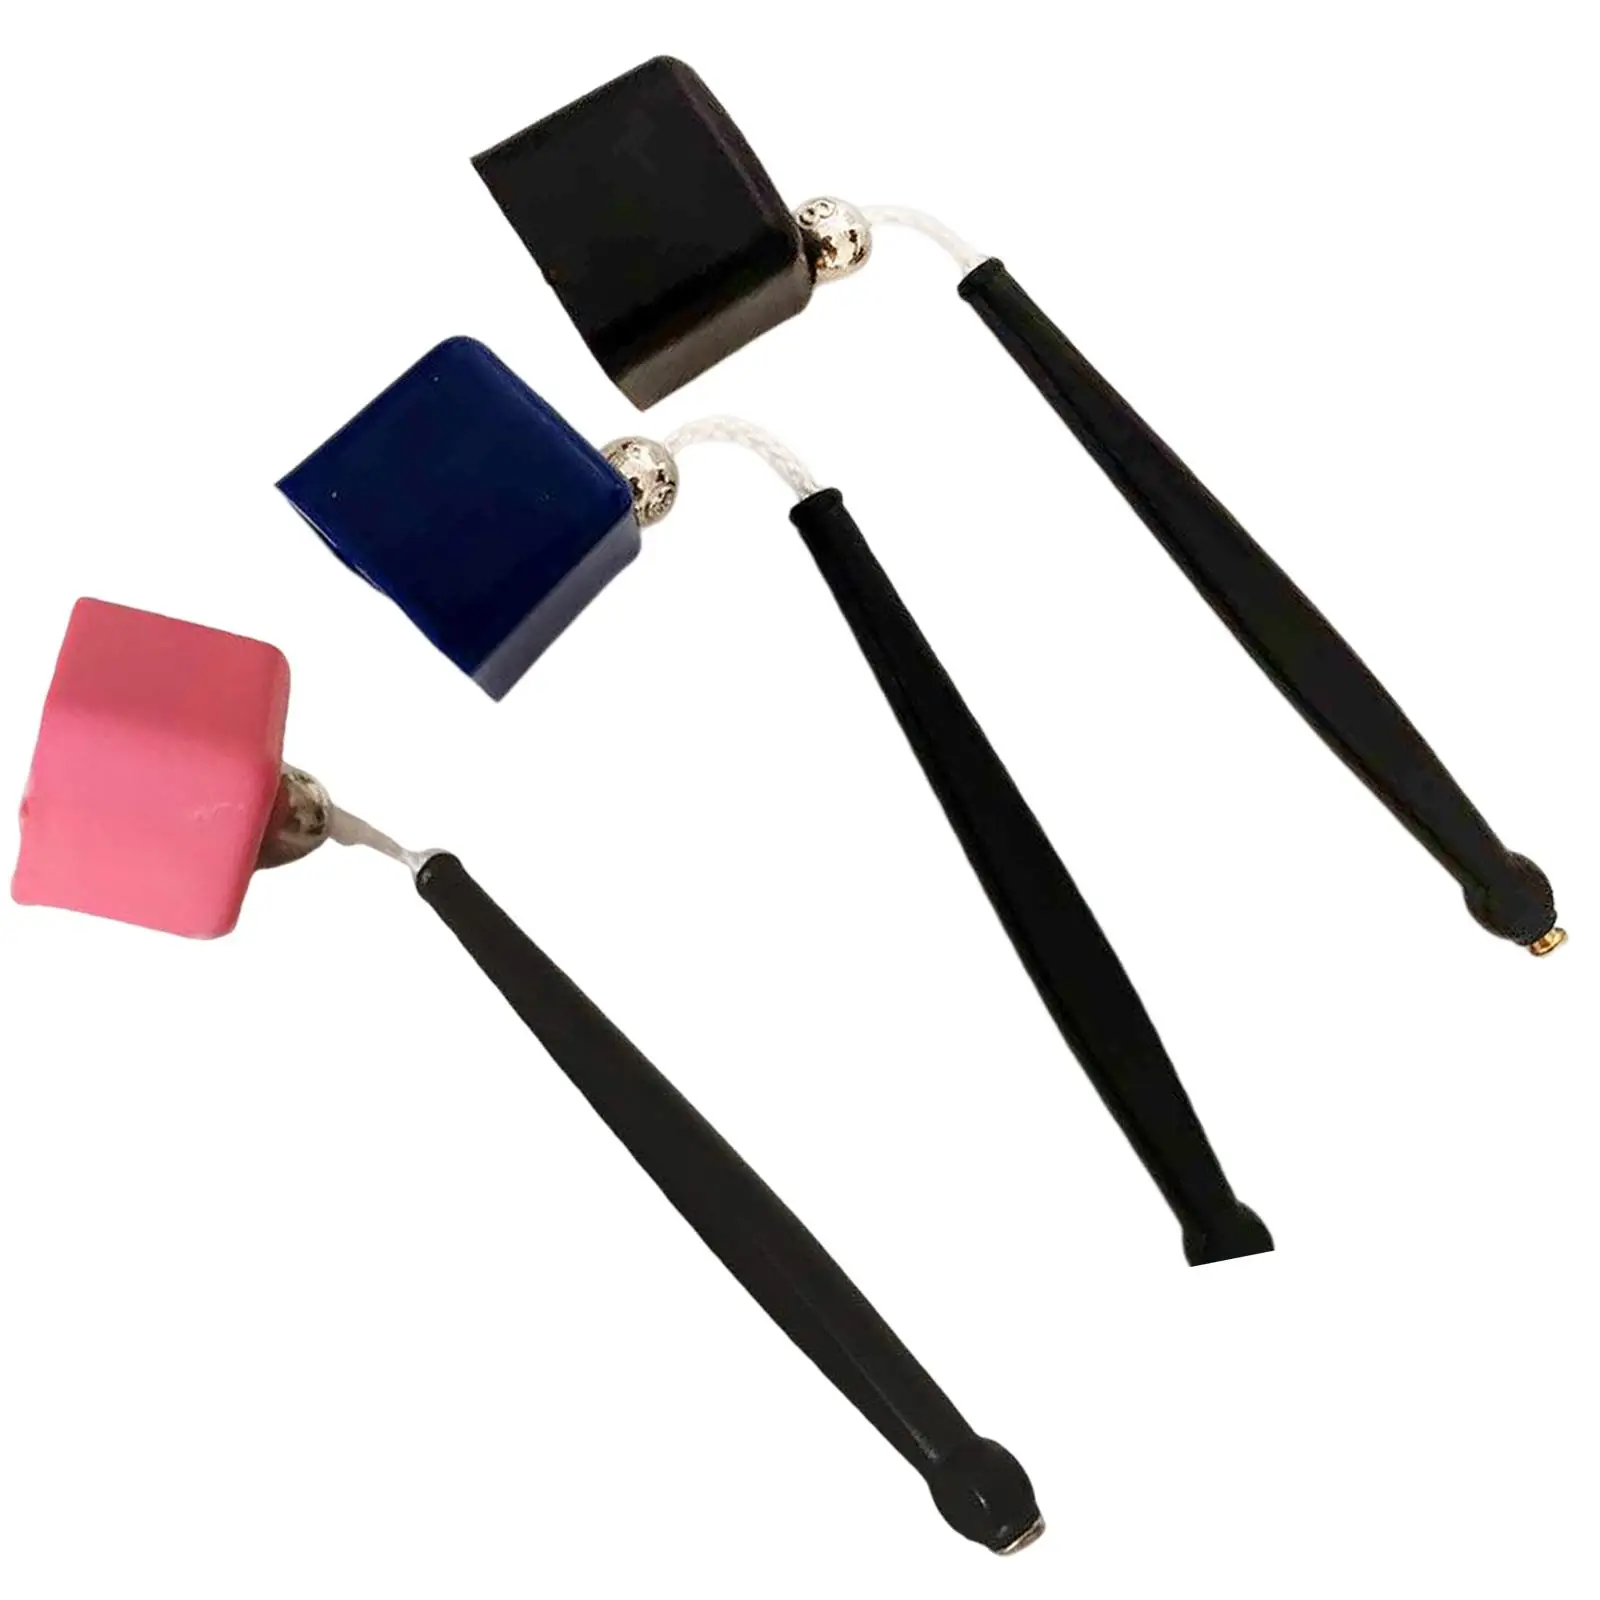 Billiards Pocket Chalkers Holder Entertainment Easy to Carry Black Billiards